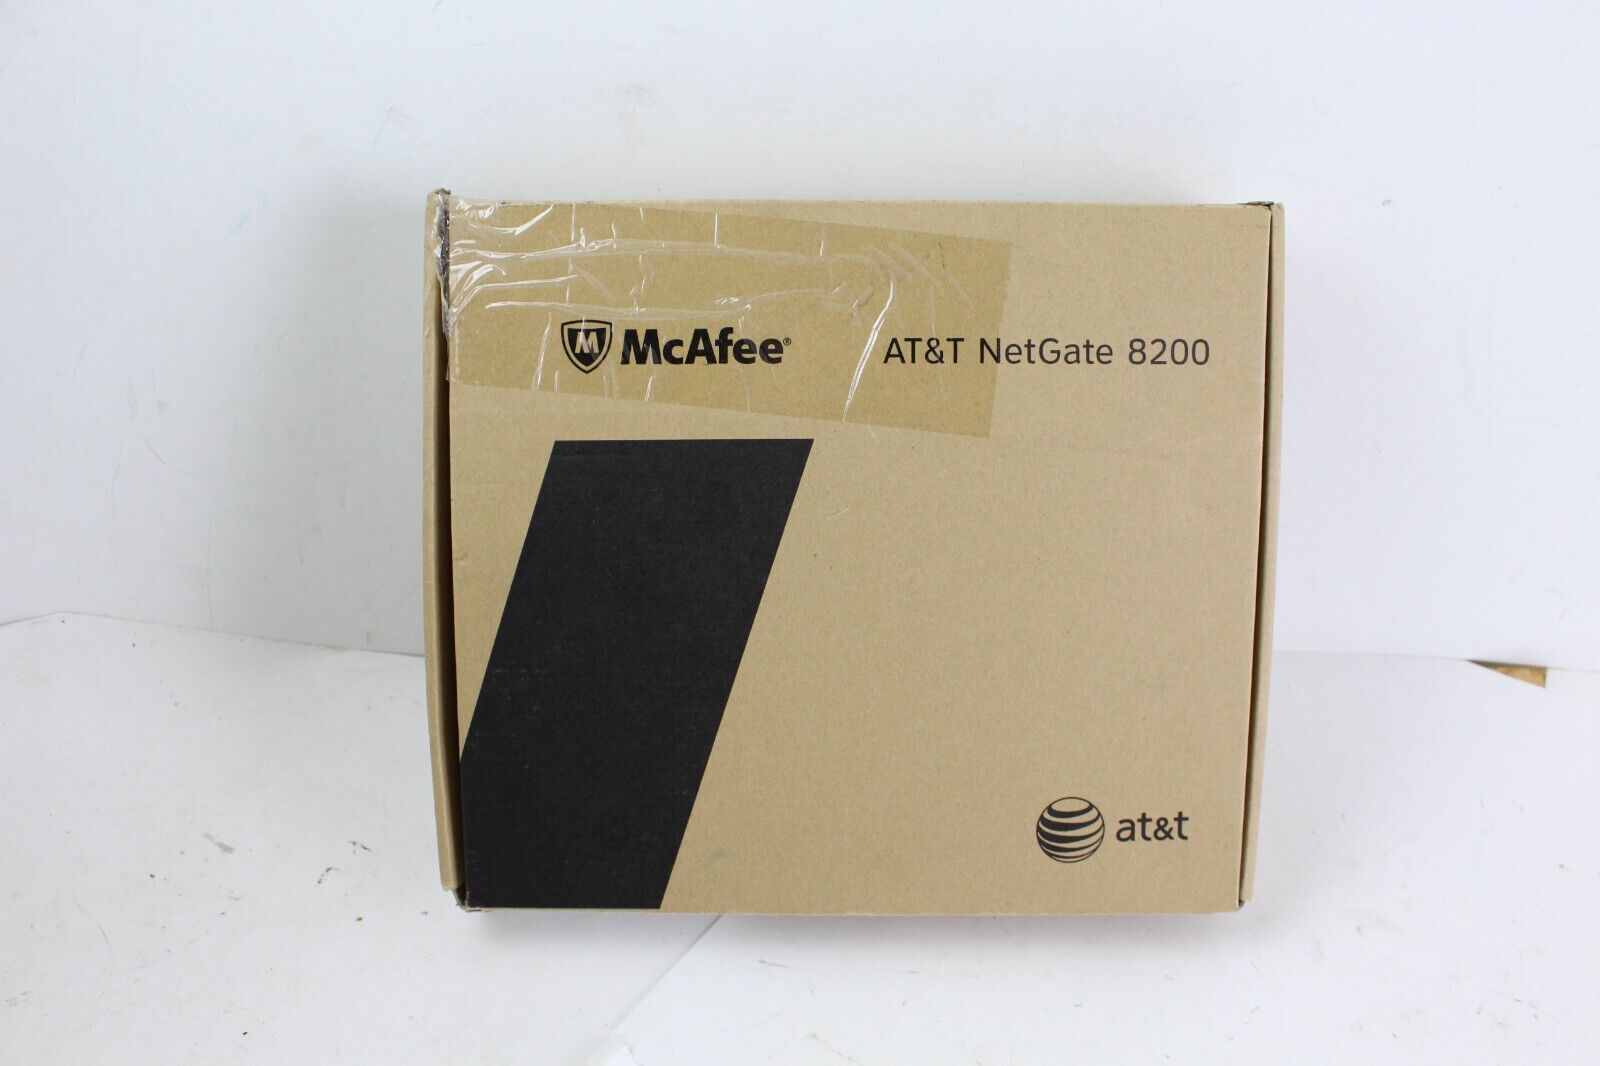 NEW OPEN BOX AT&T Netgate 8200 AT&T McAfee 8-Port Firewall Switch